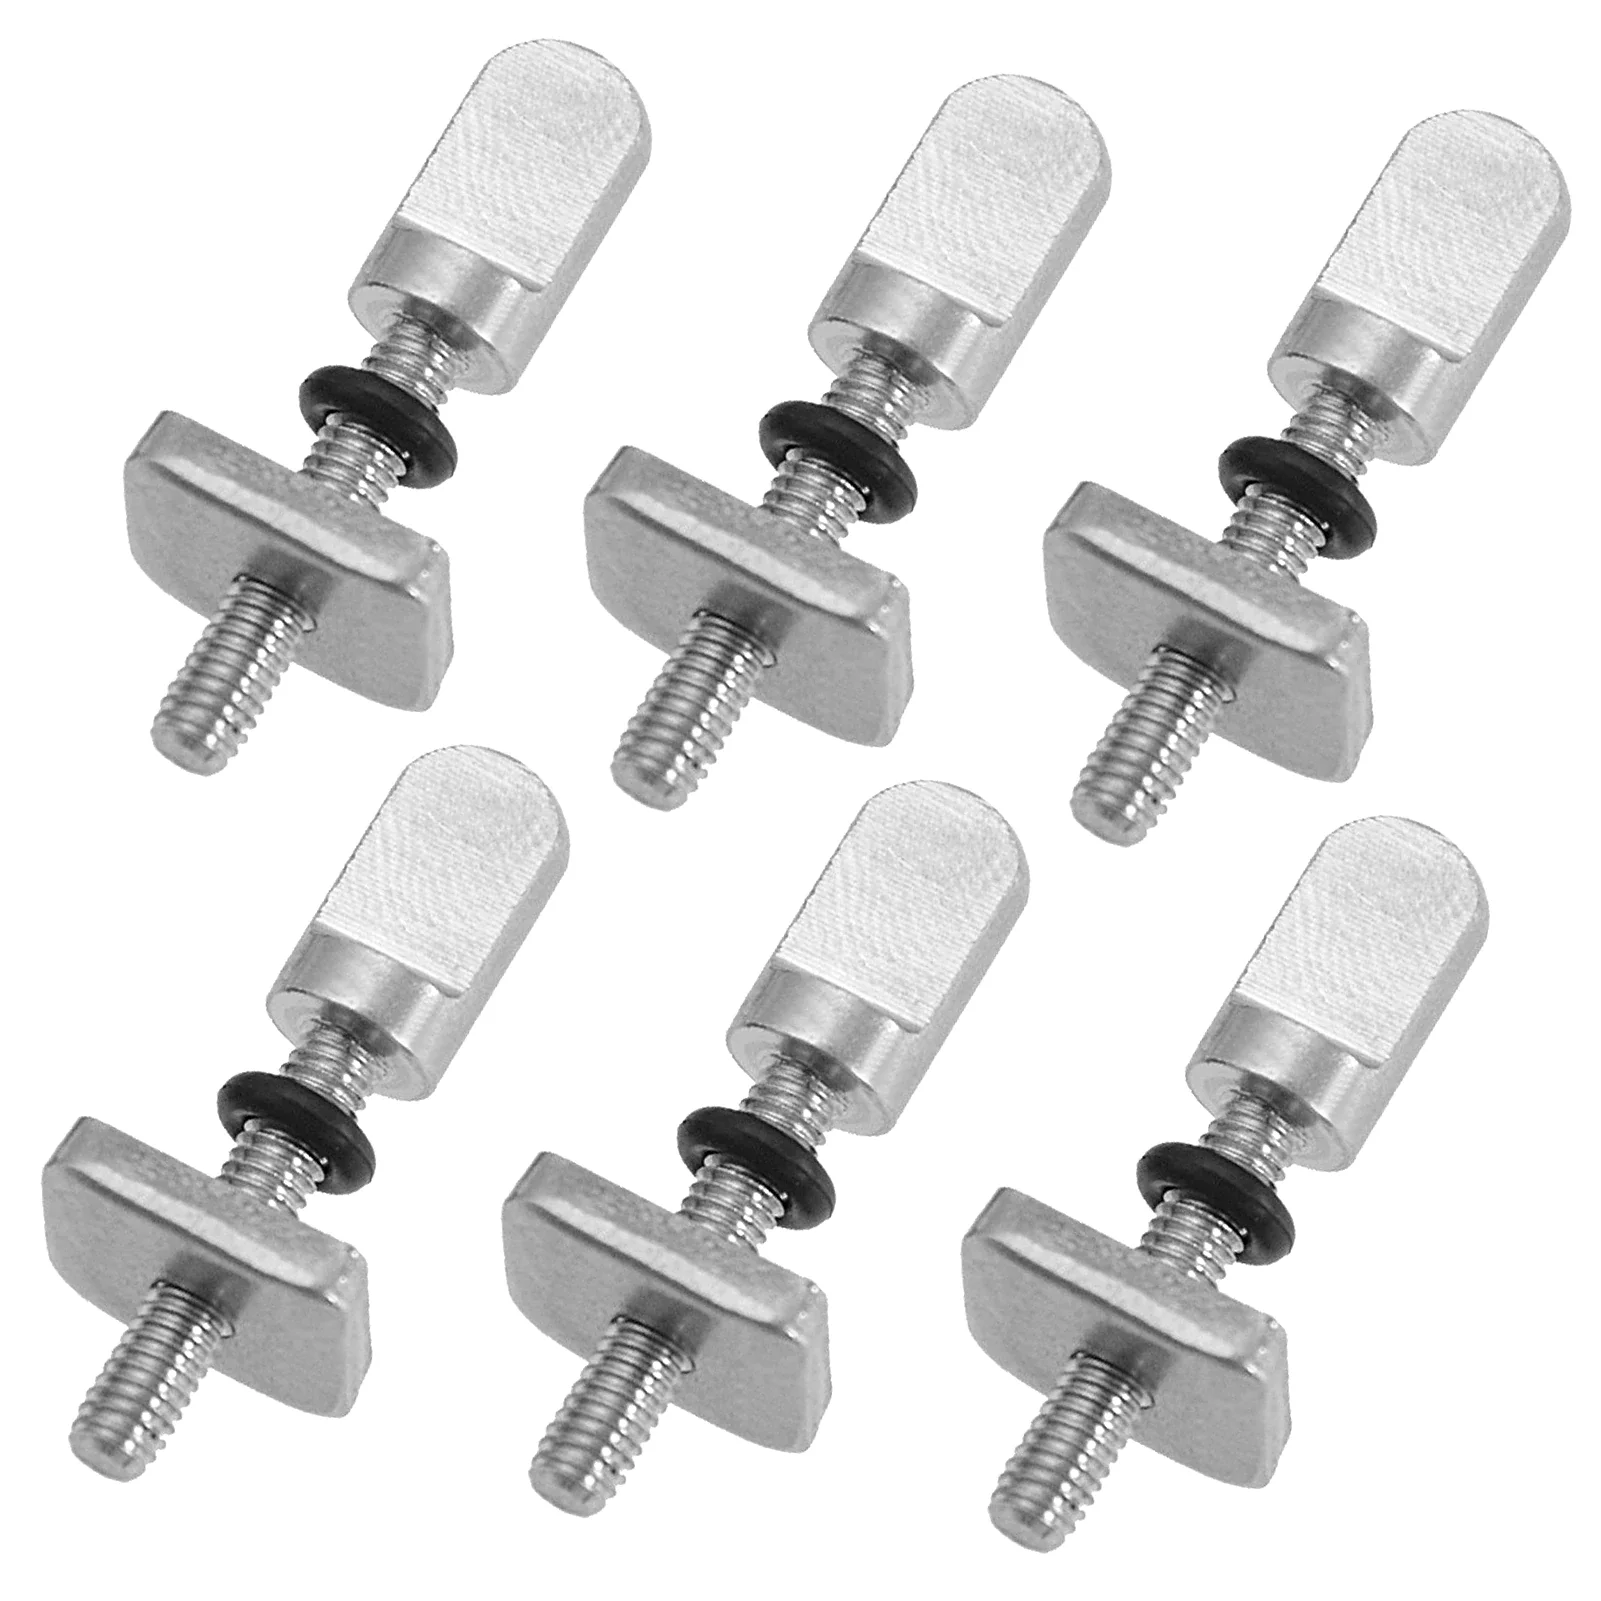 3pcs/6pcs Stainless Steel Surfboard Fin Screw M4 Surf Fin Bolts Longboard Sliding Fin Screws Single Fin Nails Replacing Screws 40pcs stainless steel solid glass standoff nails side hanging wooden staircase handrail hardware screws pin bolt anchor fg801